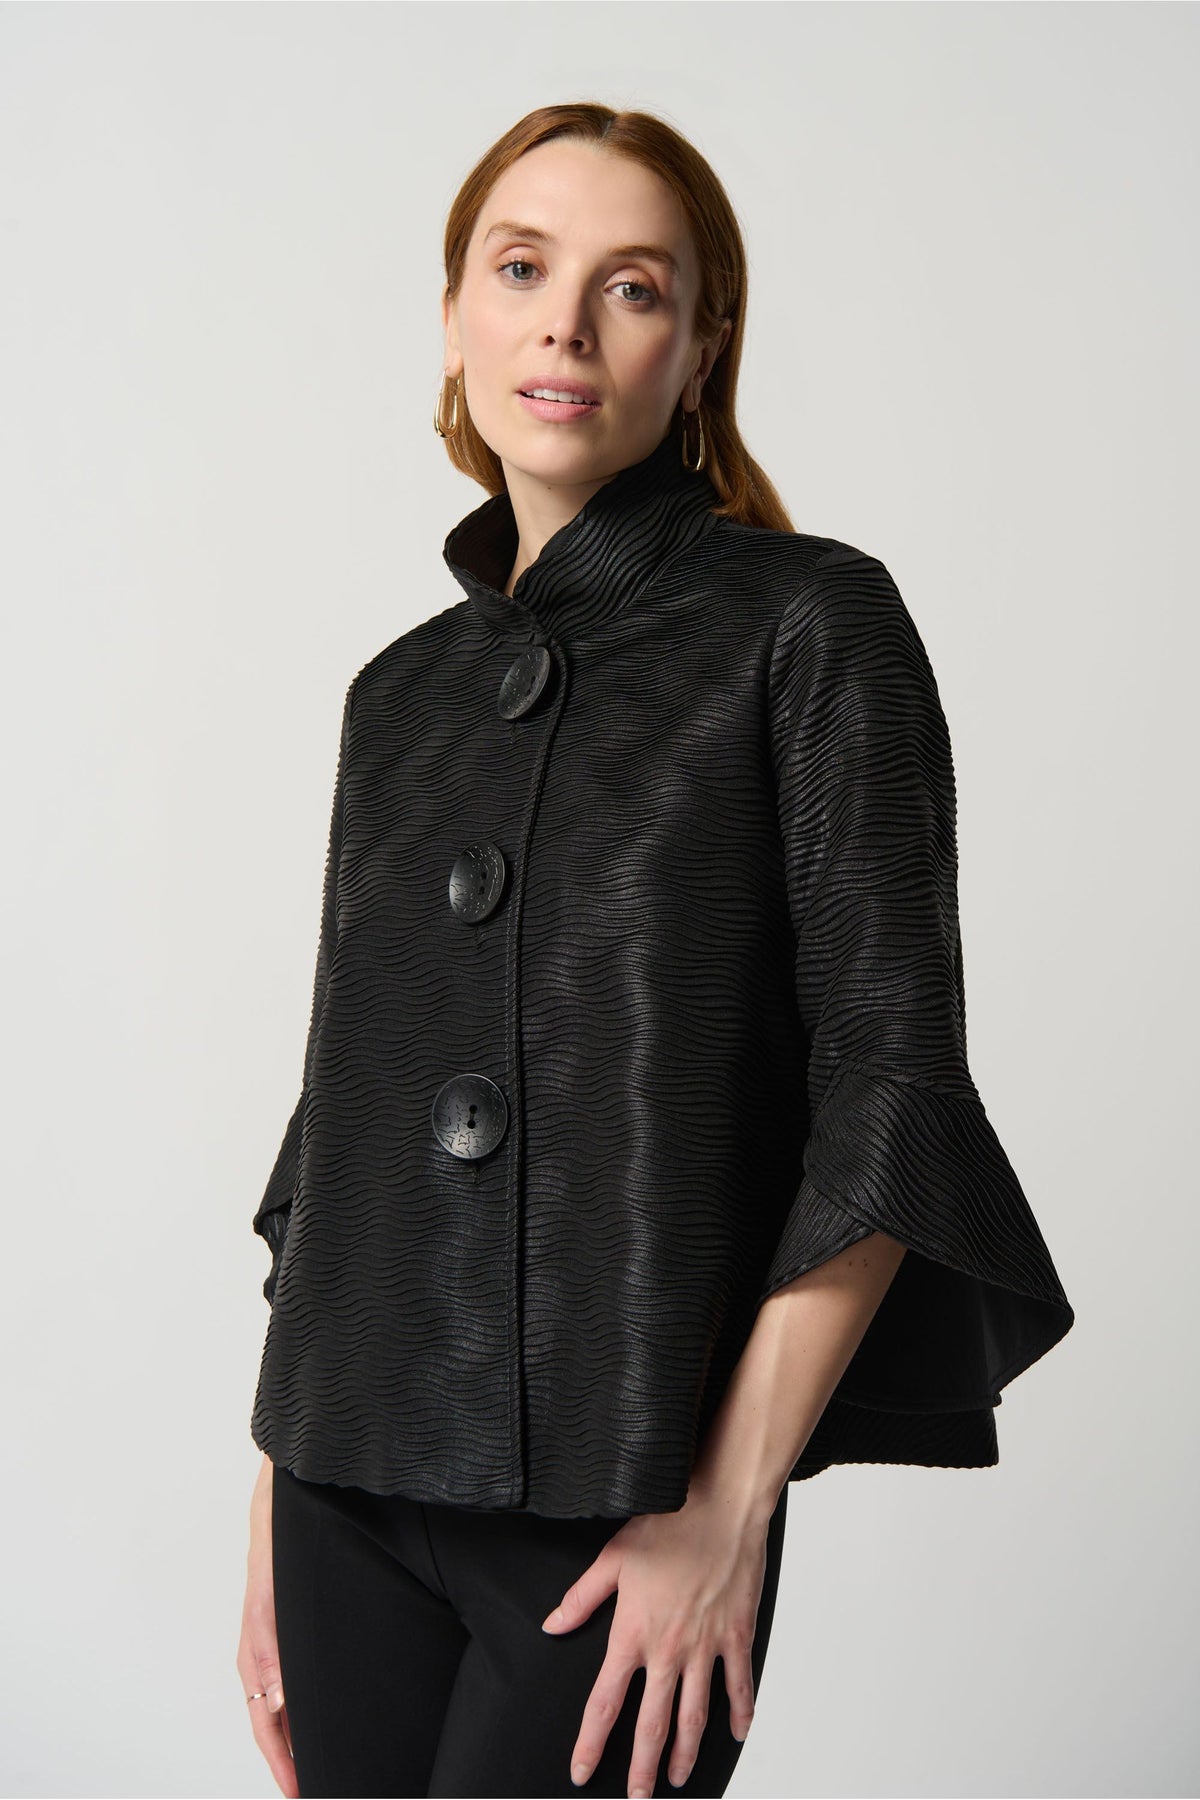 Joseph Ribkoff Trapeze Jacket With Stand Collar - Style 234260, front, black